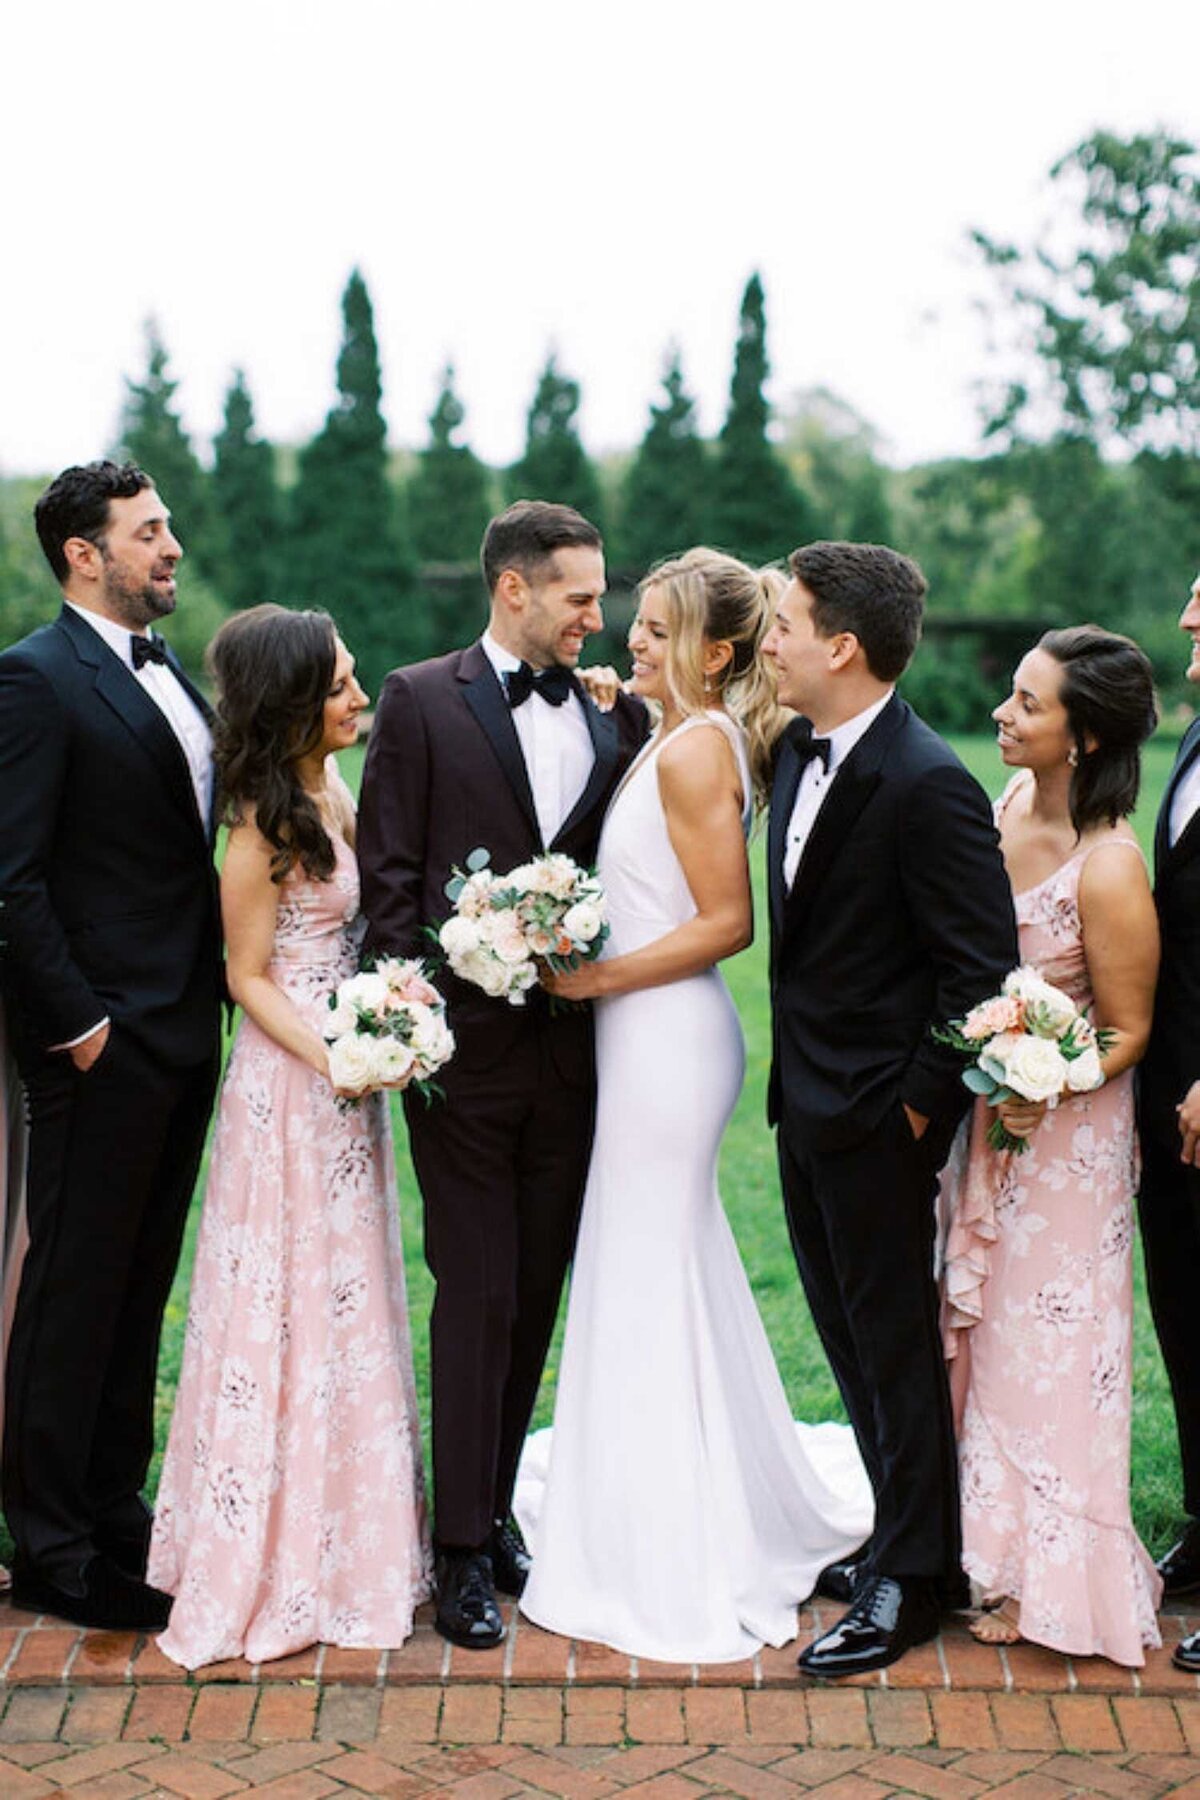 Classic and Bohemian wedding party portraits at a luxury Chicago outdoor garden wedding.